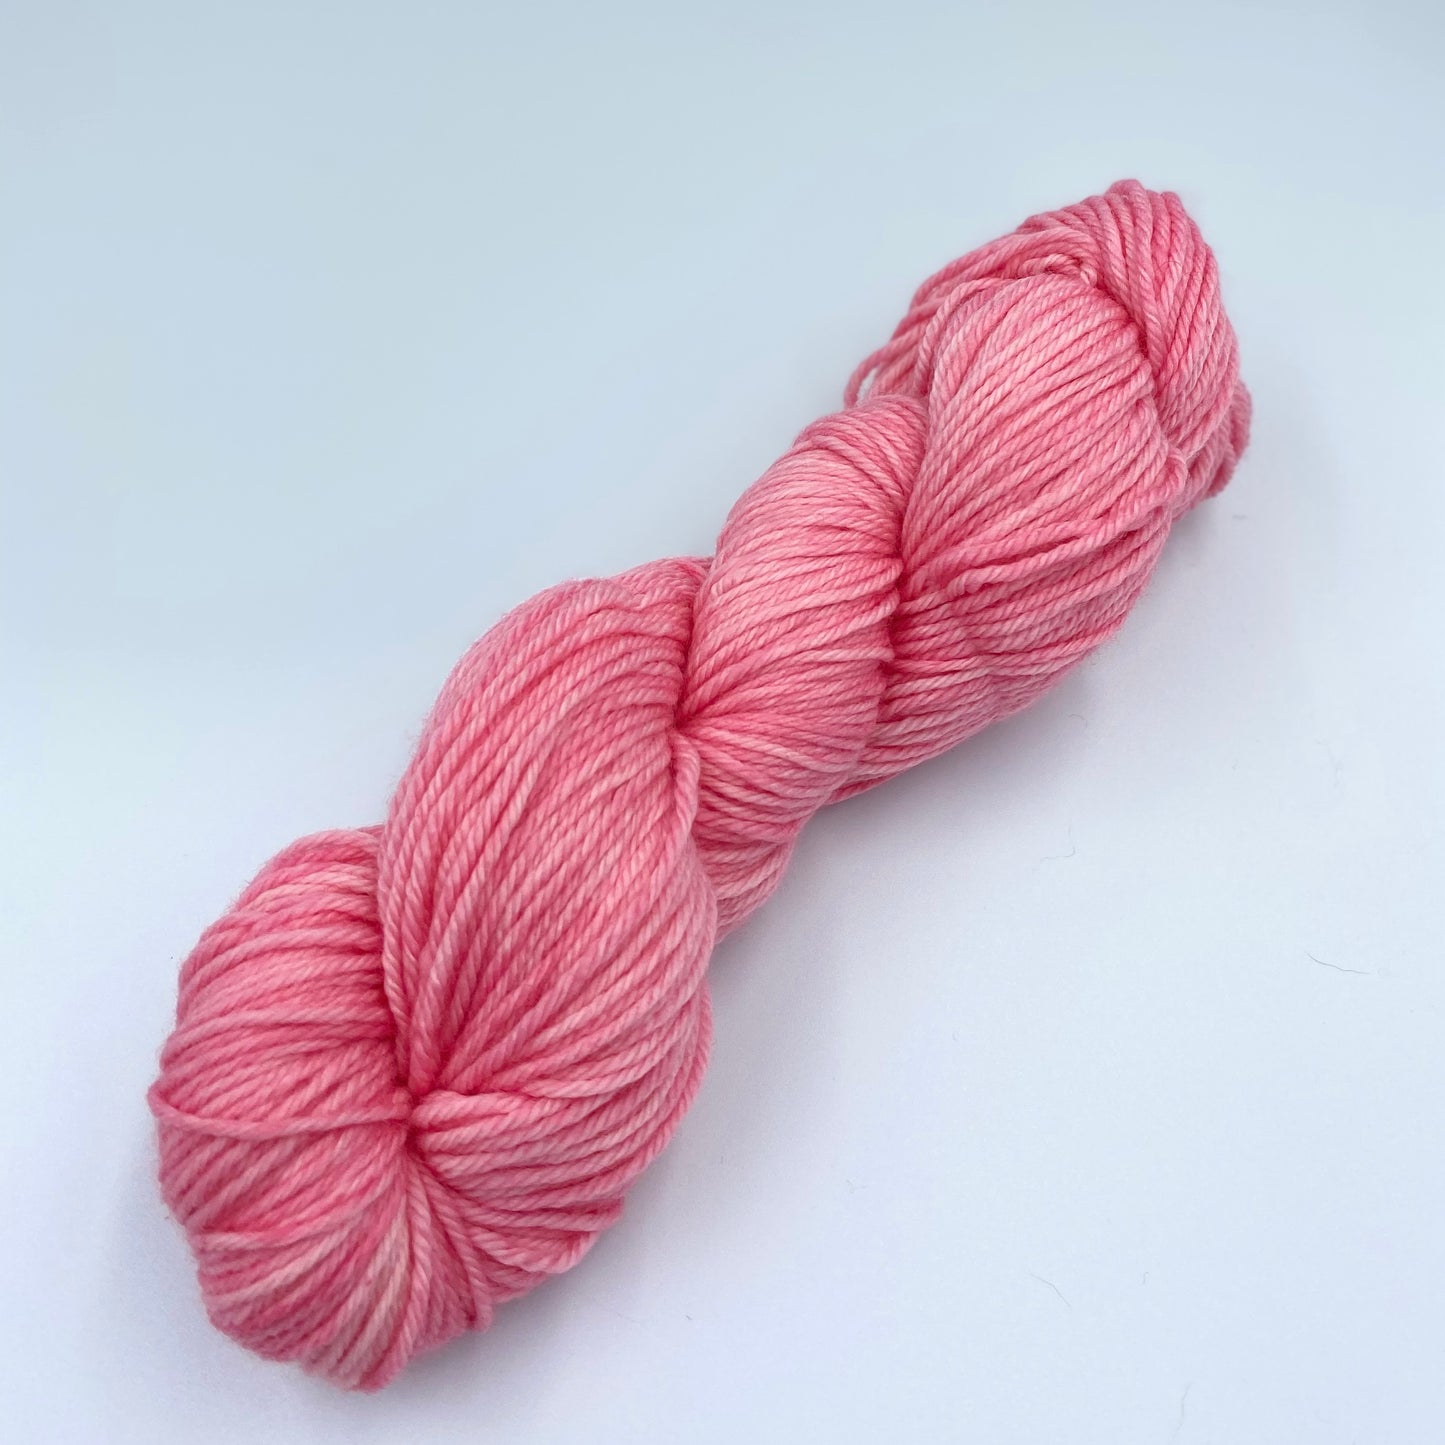 Skein of superwash merino yarn hand dyed in a baby pink color